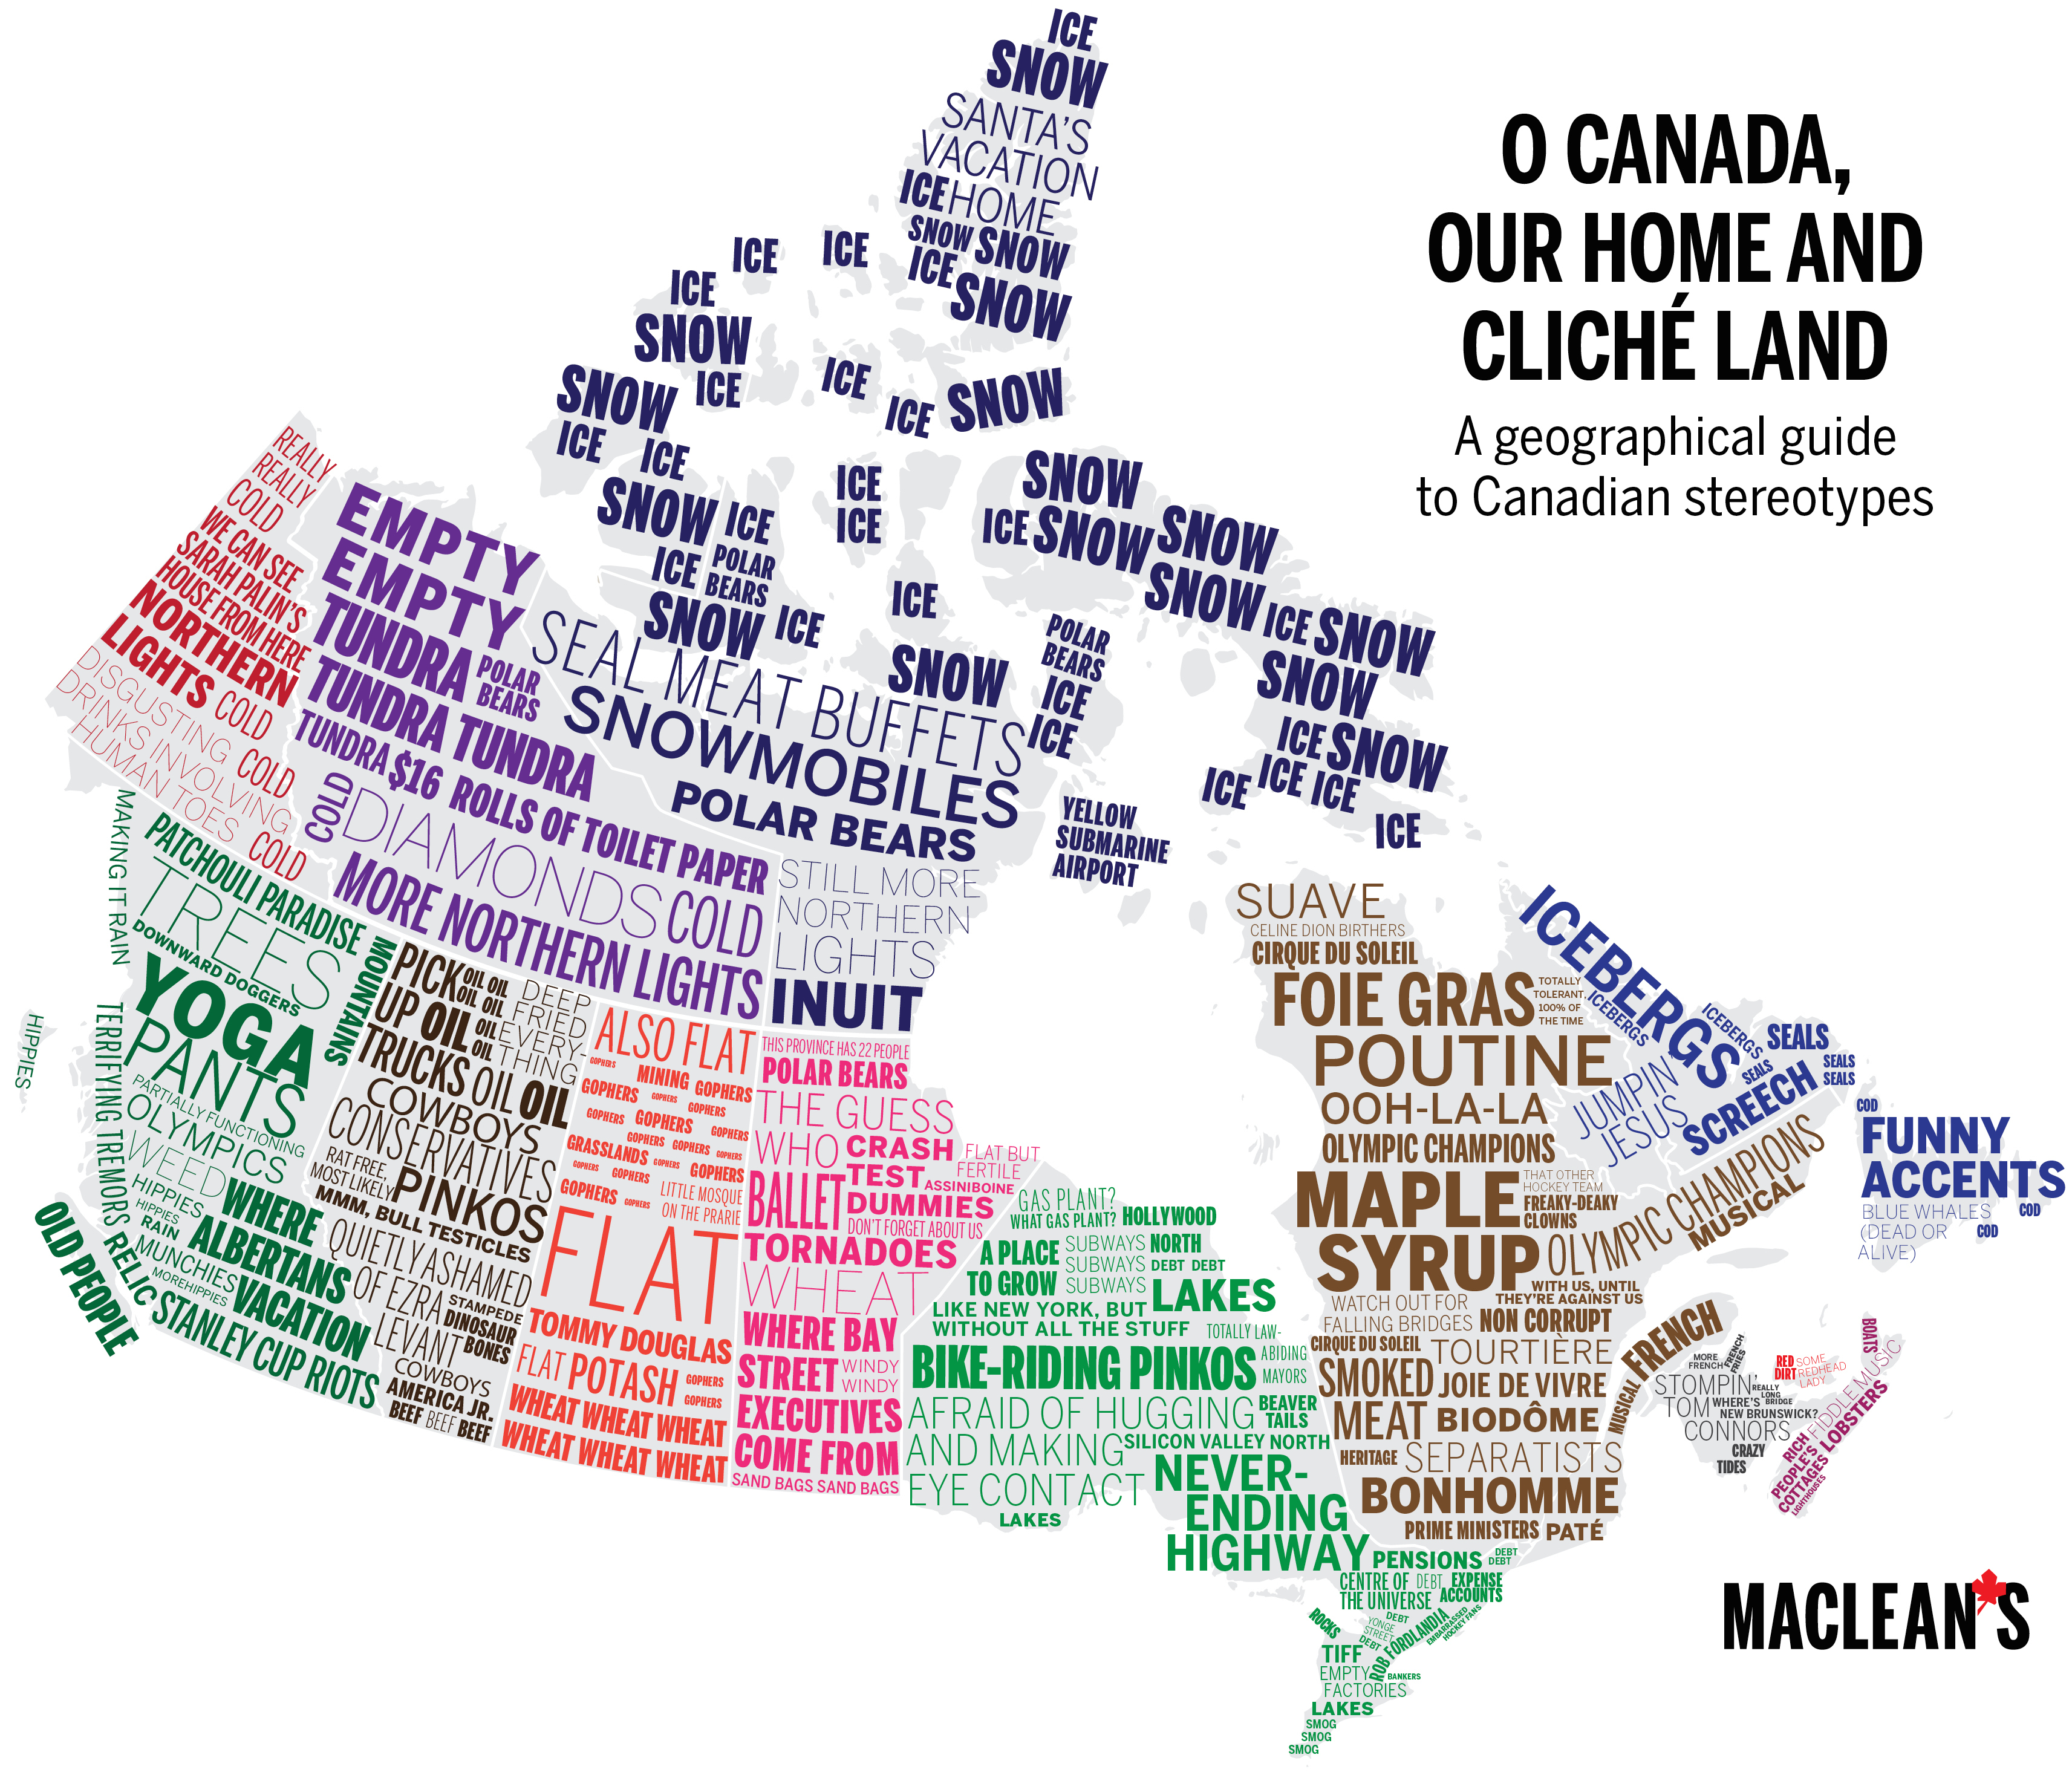 MAPPED: O Canada, our home and cliché land